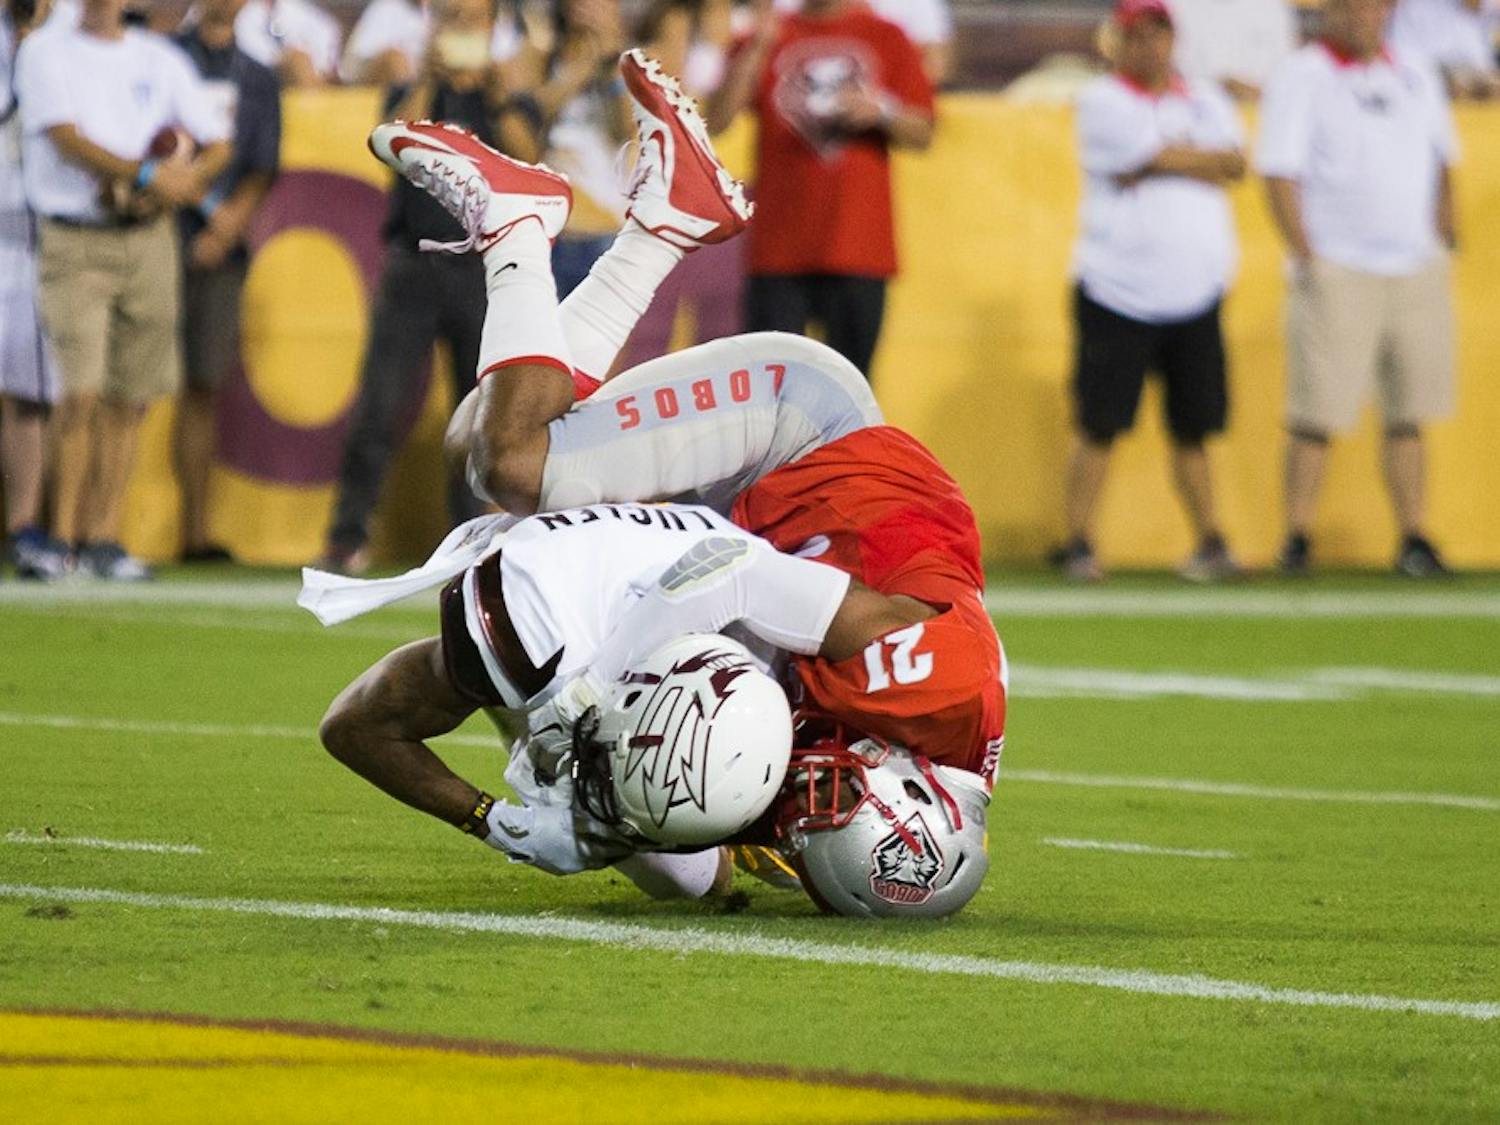 Photos: ASU football surges late, cruises to 34-10 victory over New Mexico